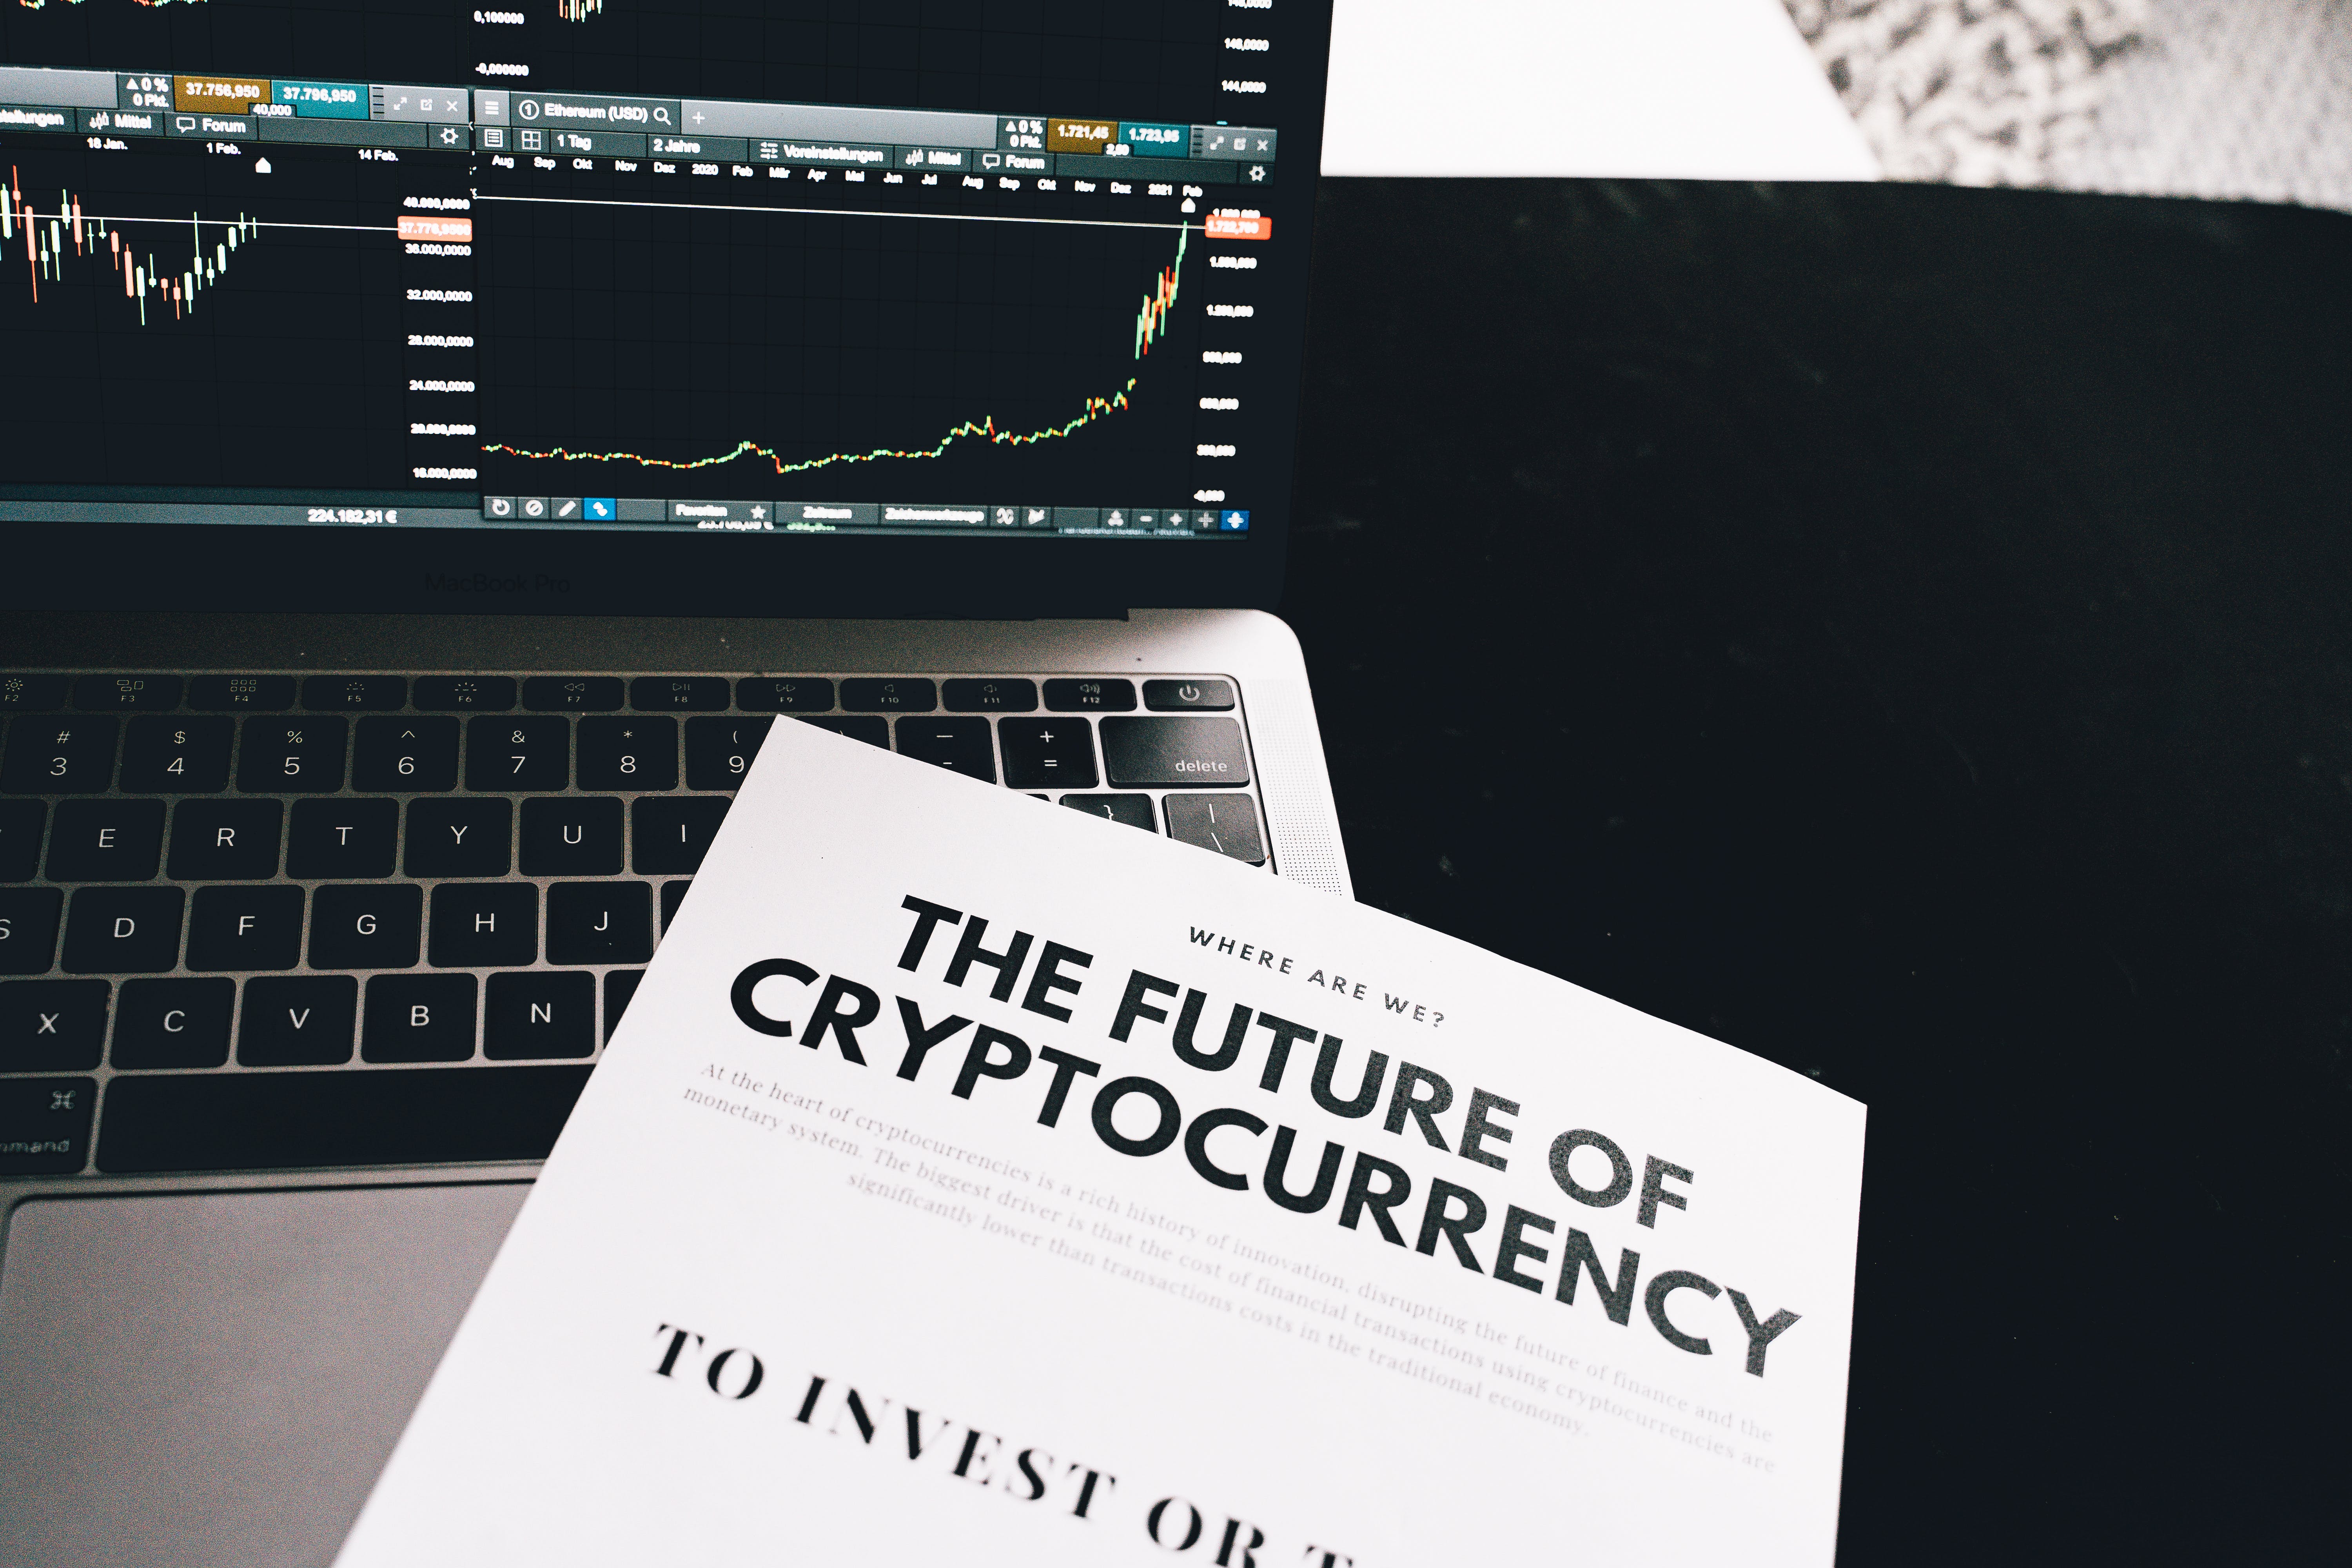 In terms of cryptocurrency investment, changes can occur at a rapid pace